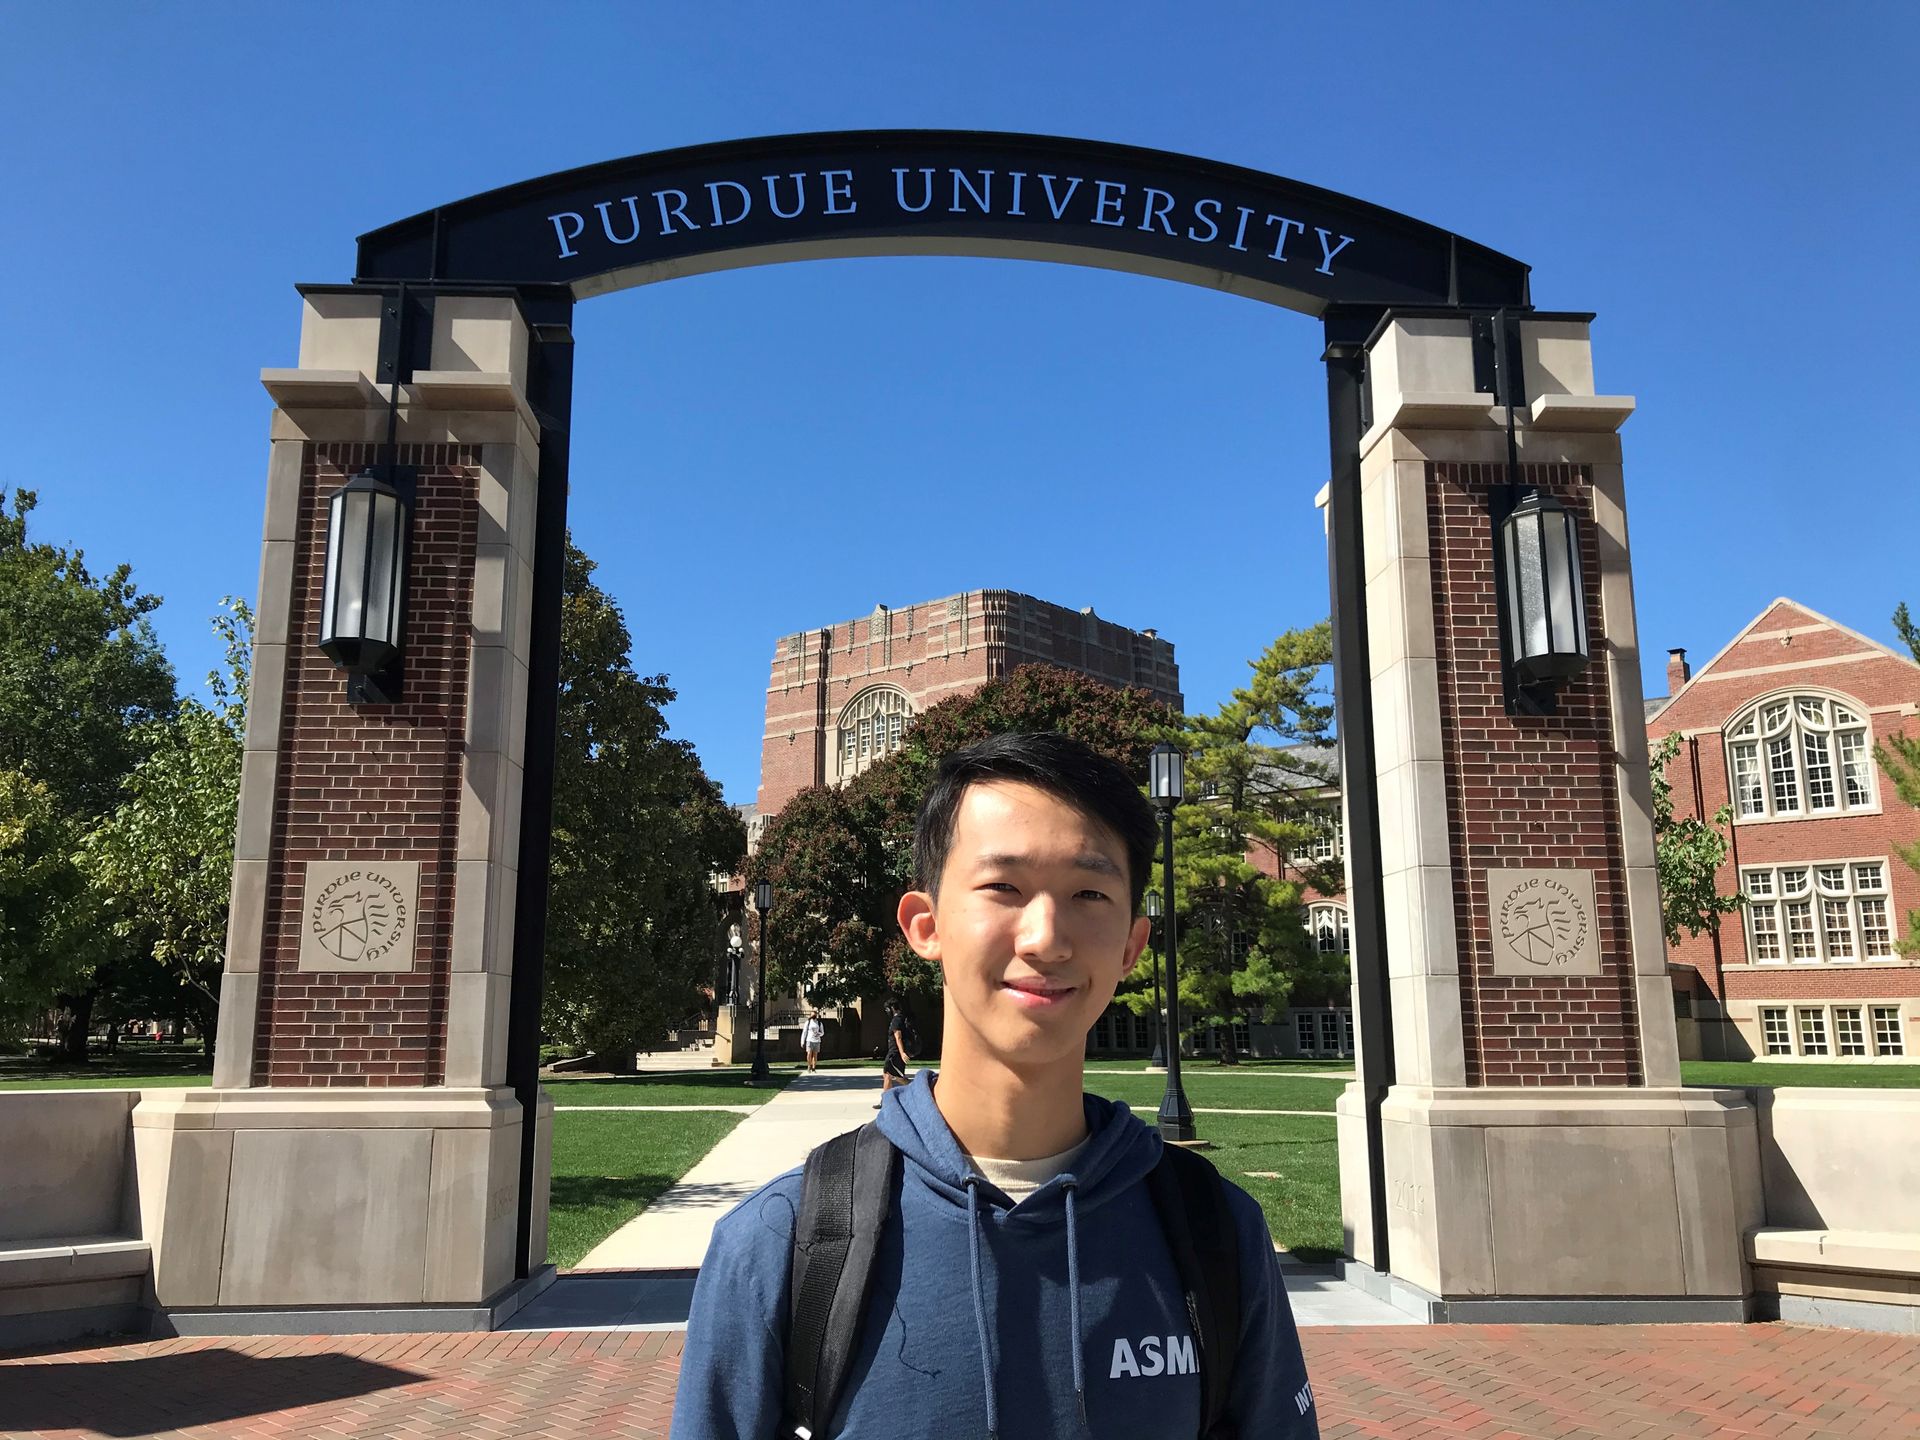 ASMLintern Jason Jeon poses in front of Purdue University in Indiana.